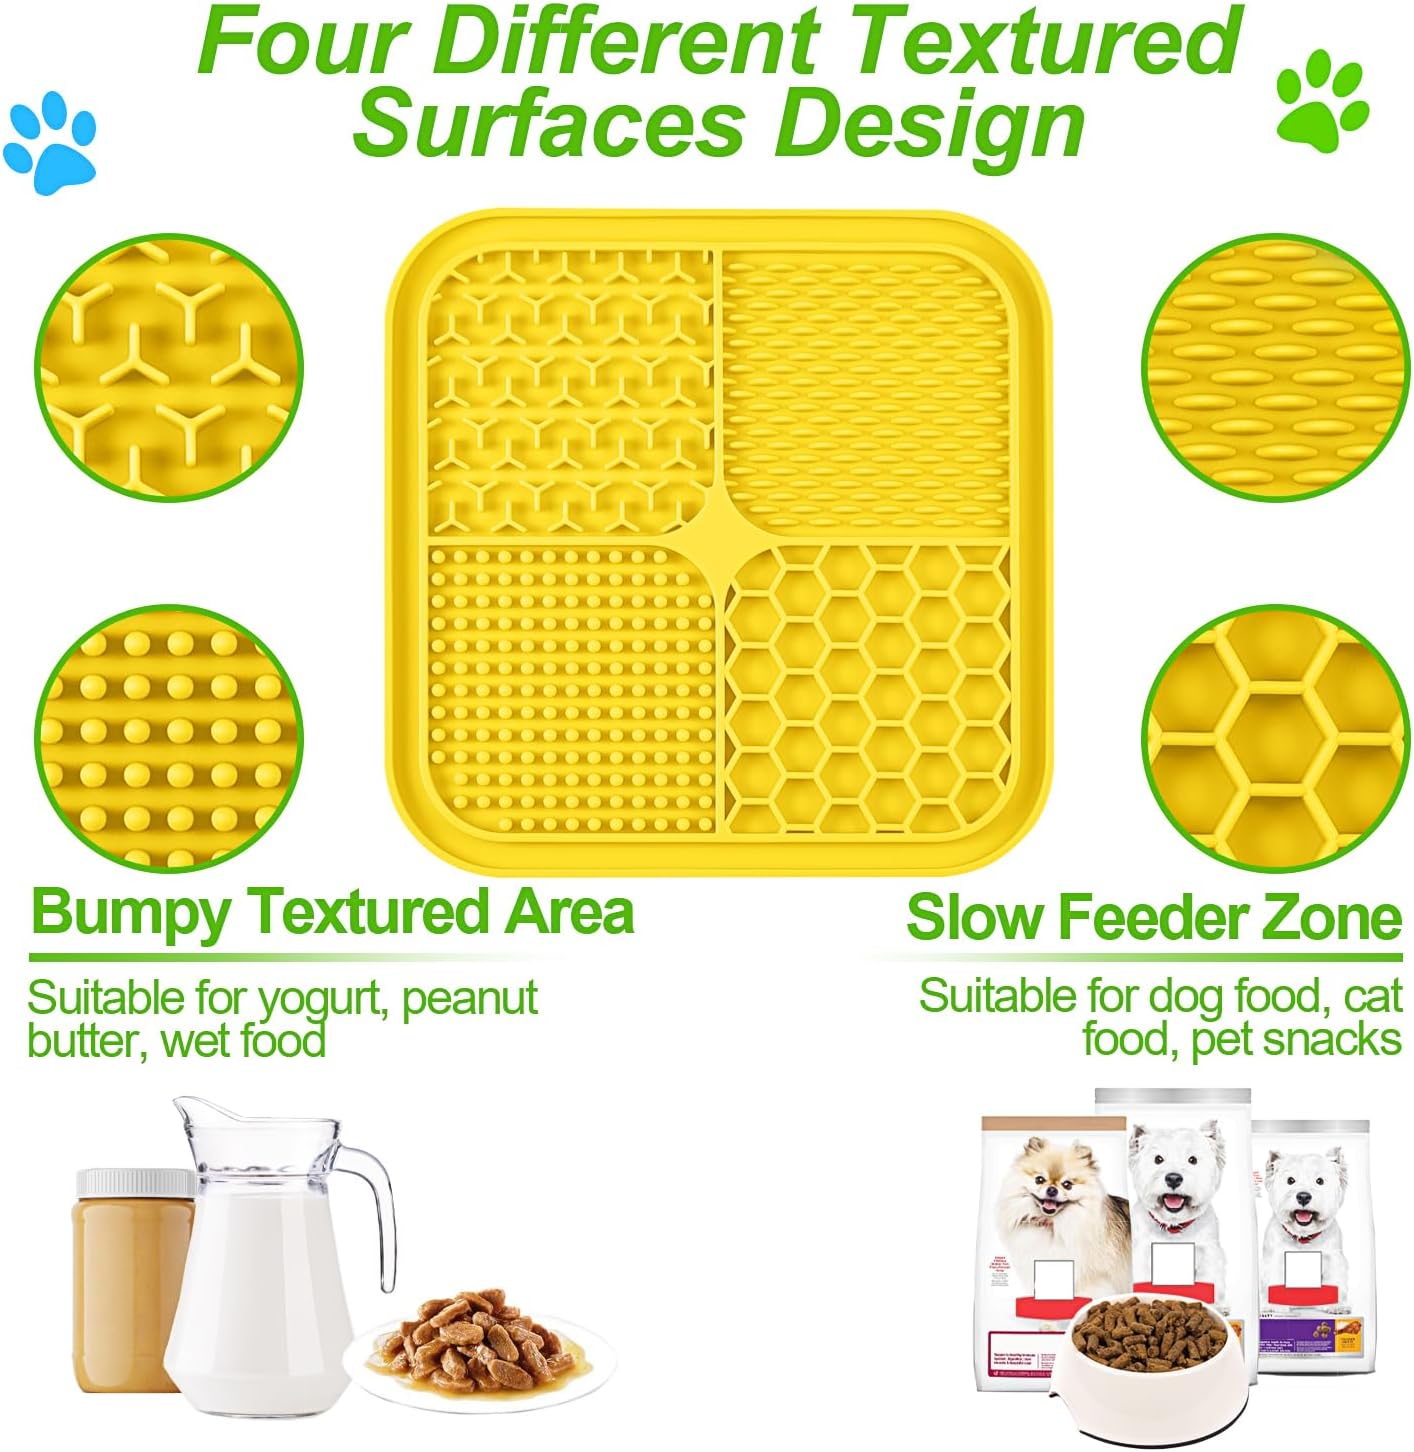 LUKITO 3PCS Lick Mat for Dogs and Cats, Licking Mat with Suction Cups for Dog Anxiety Relief, Cat Peanut Butter Lick Pad for Boredom Reducer, Dog Enrichment Toy, Dog Treat Mat for Bathing Grooming